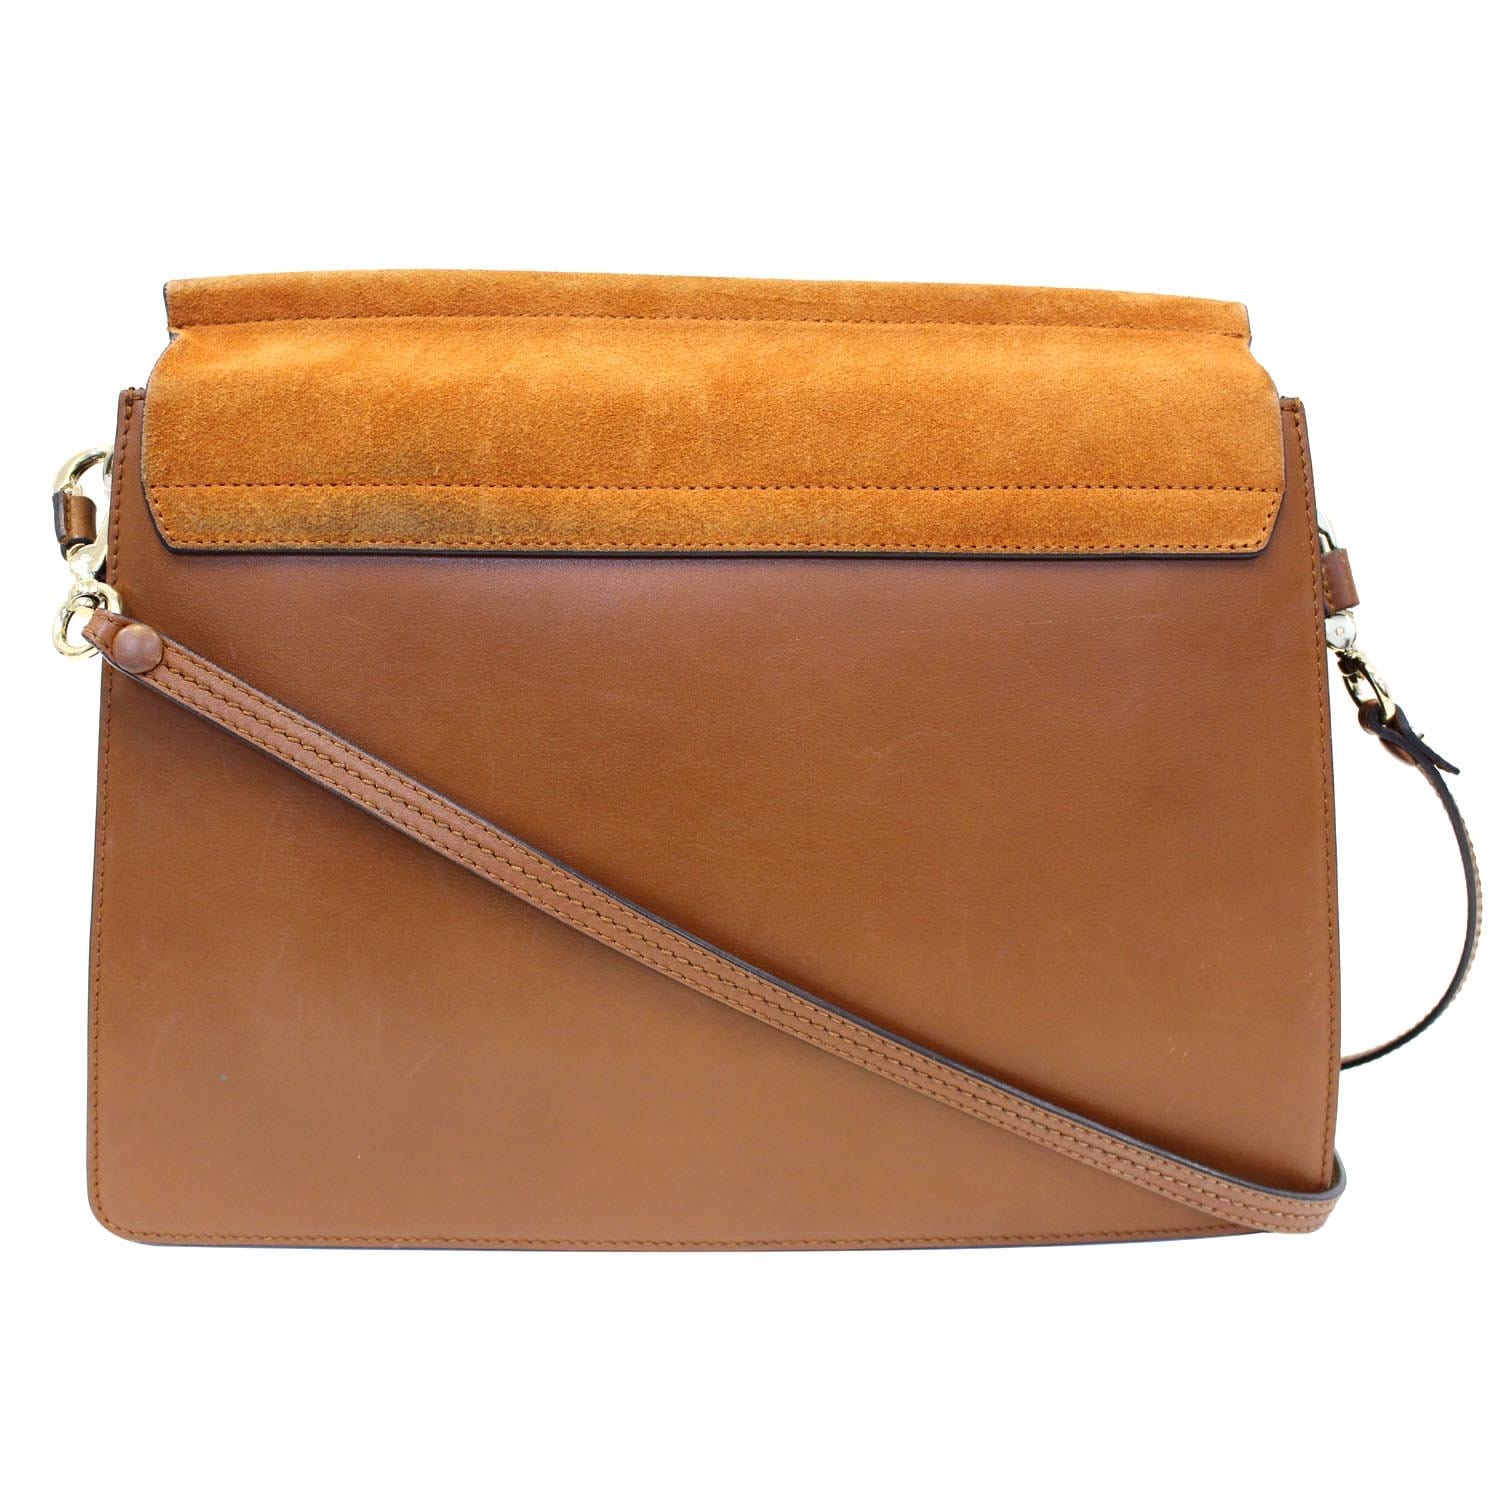 CC SKYE Leight Luxe Brown Leather Fringes Shoulder Bag